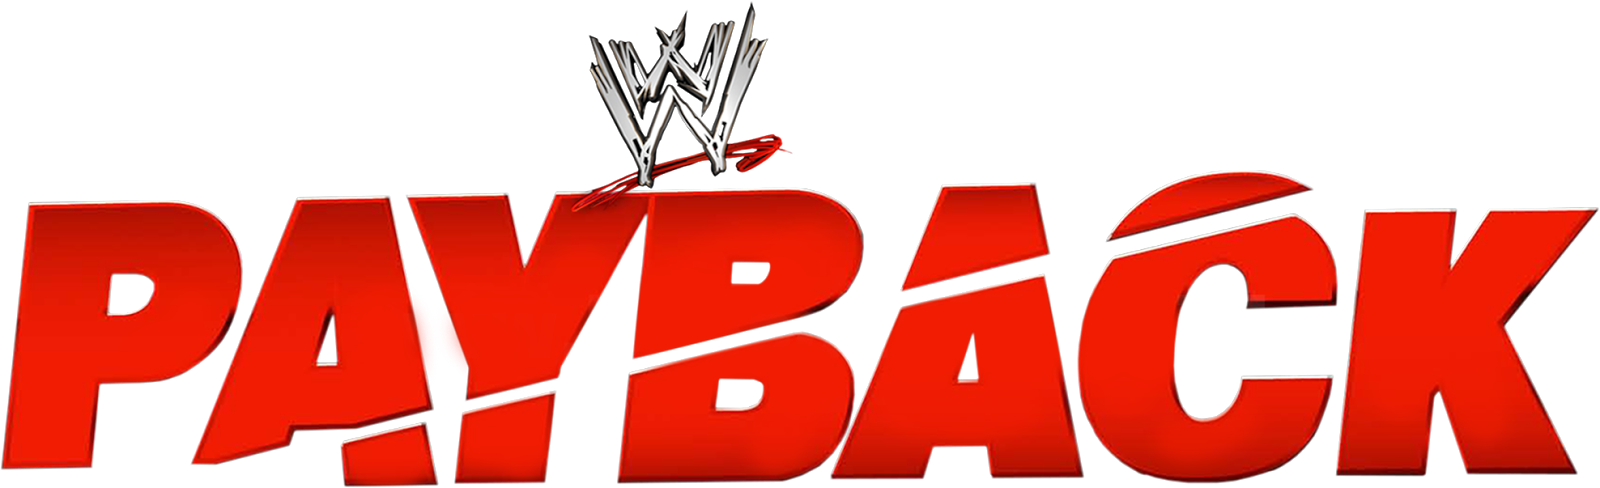 Archived: WWE Payback Predictions - archived